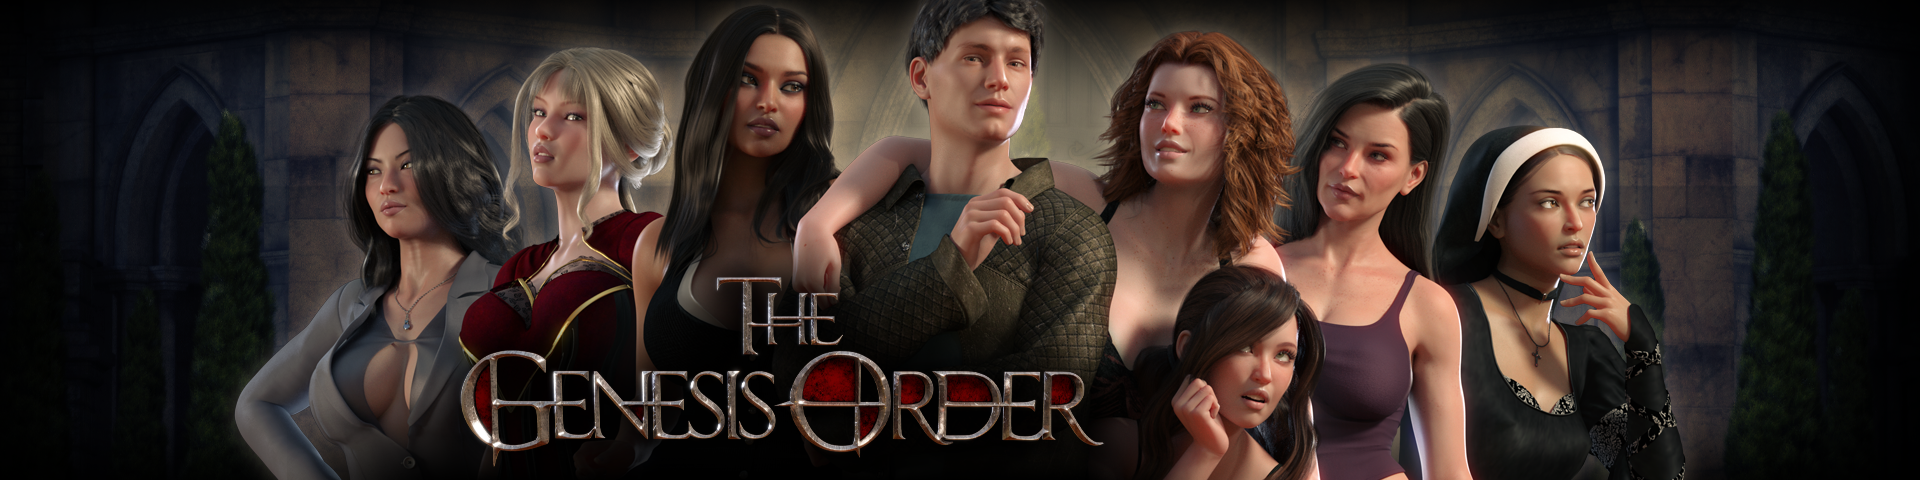 The genises order